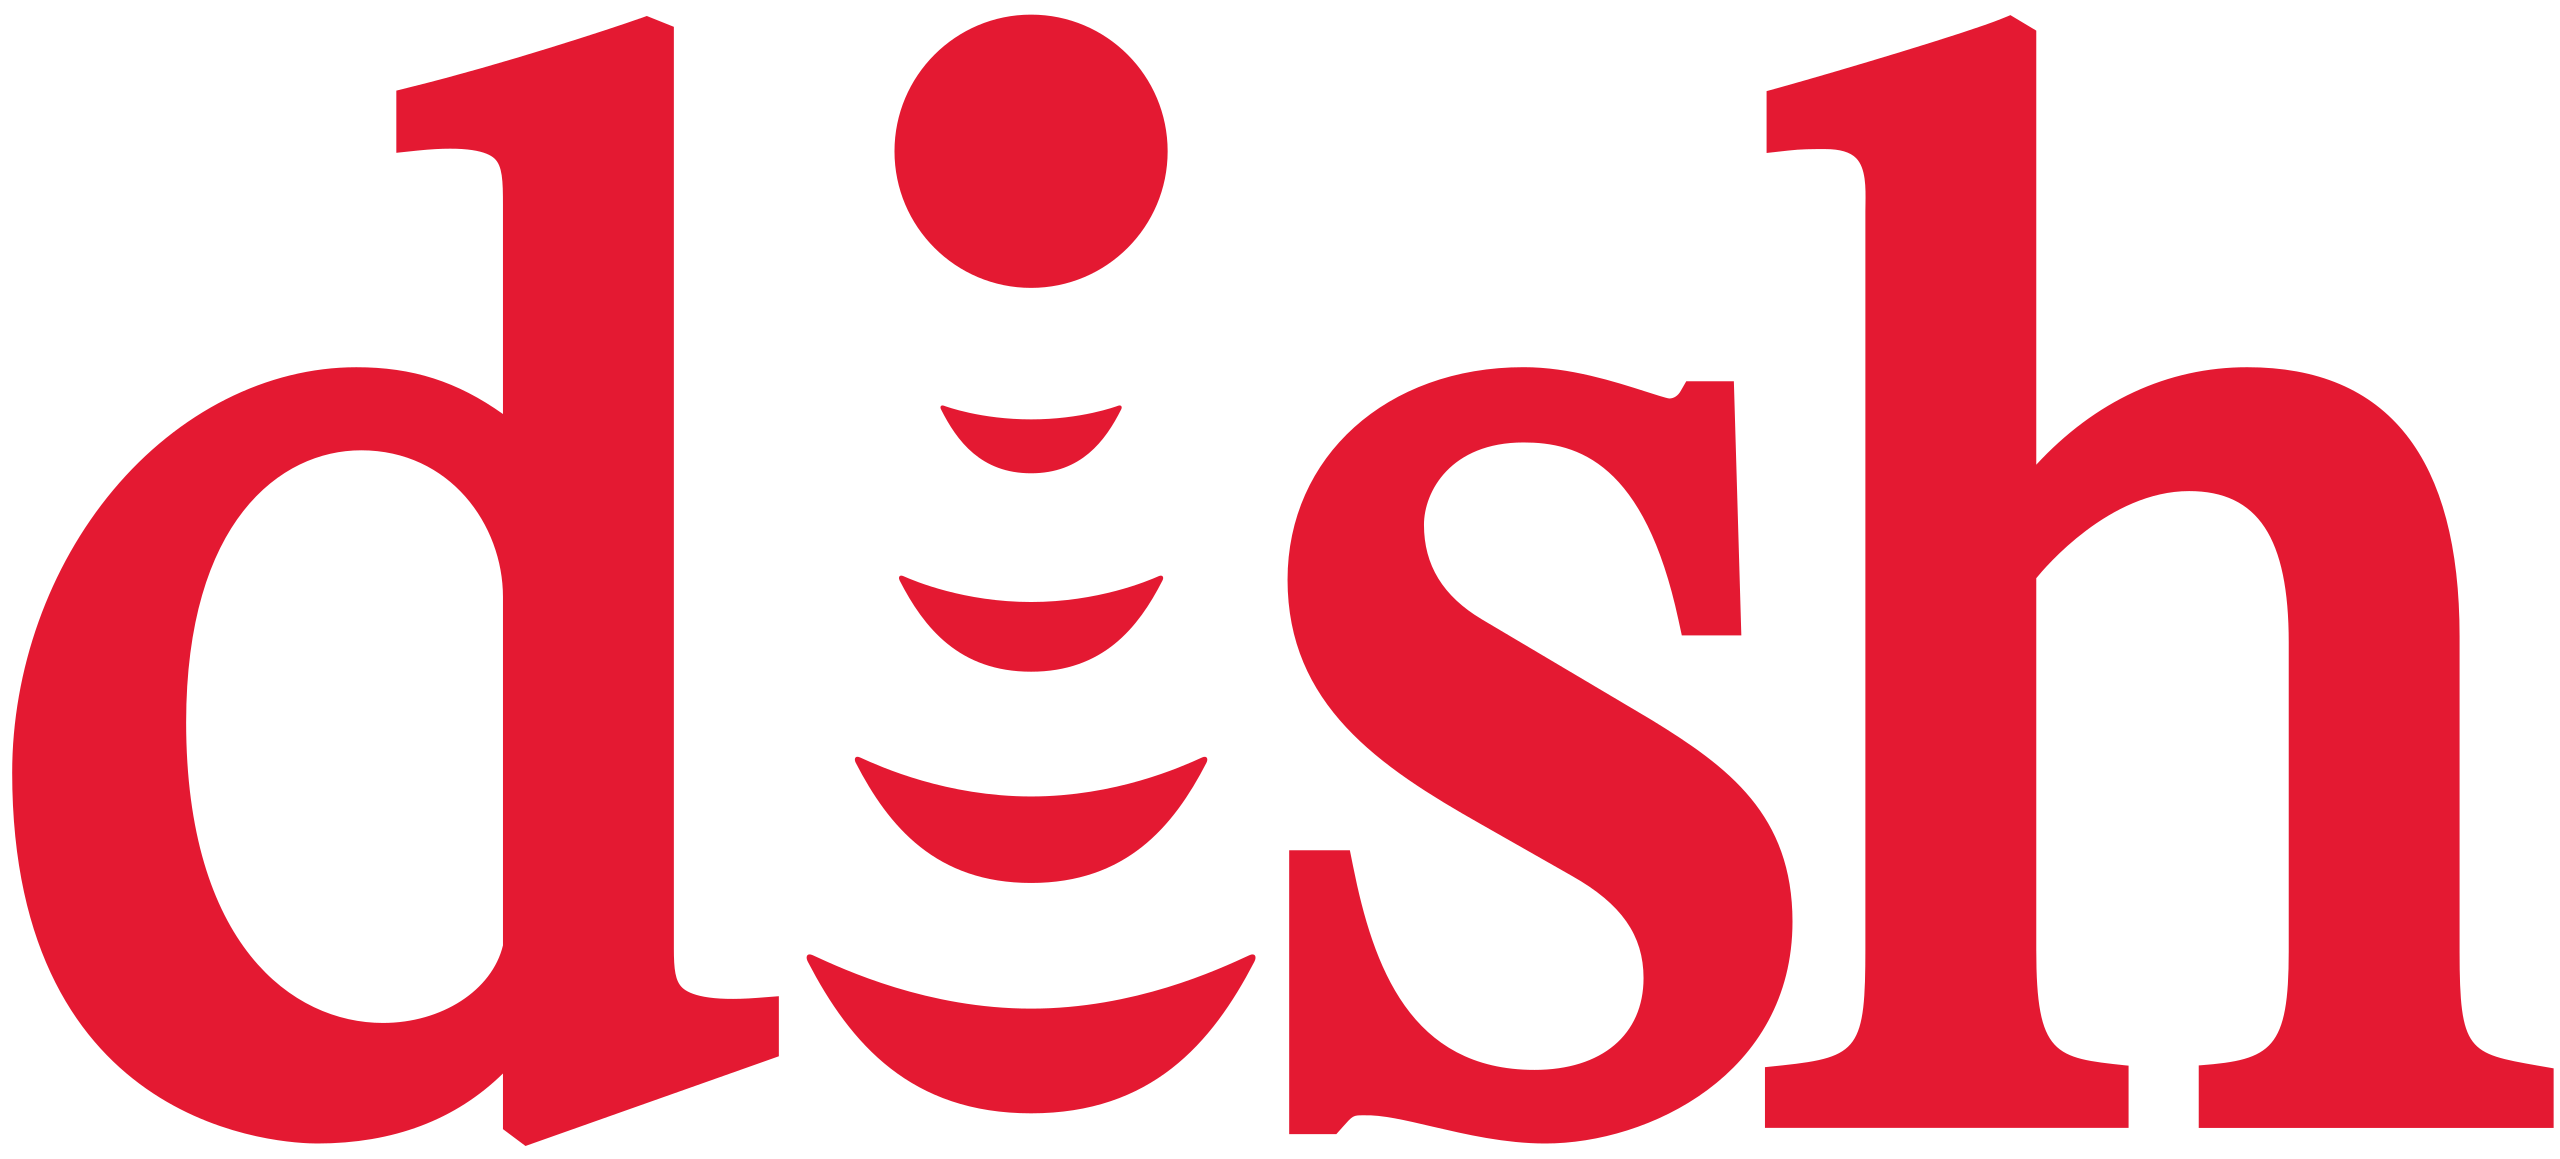 DISH Network has filed a new patent aiming to disrupt pirate IPTV services.